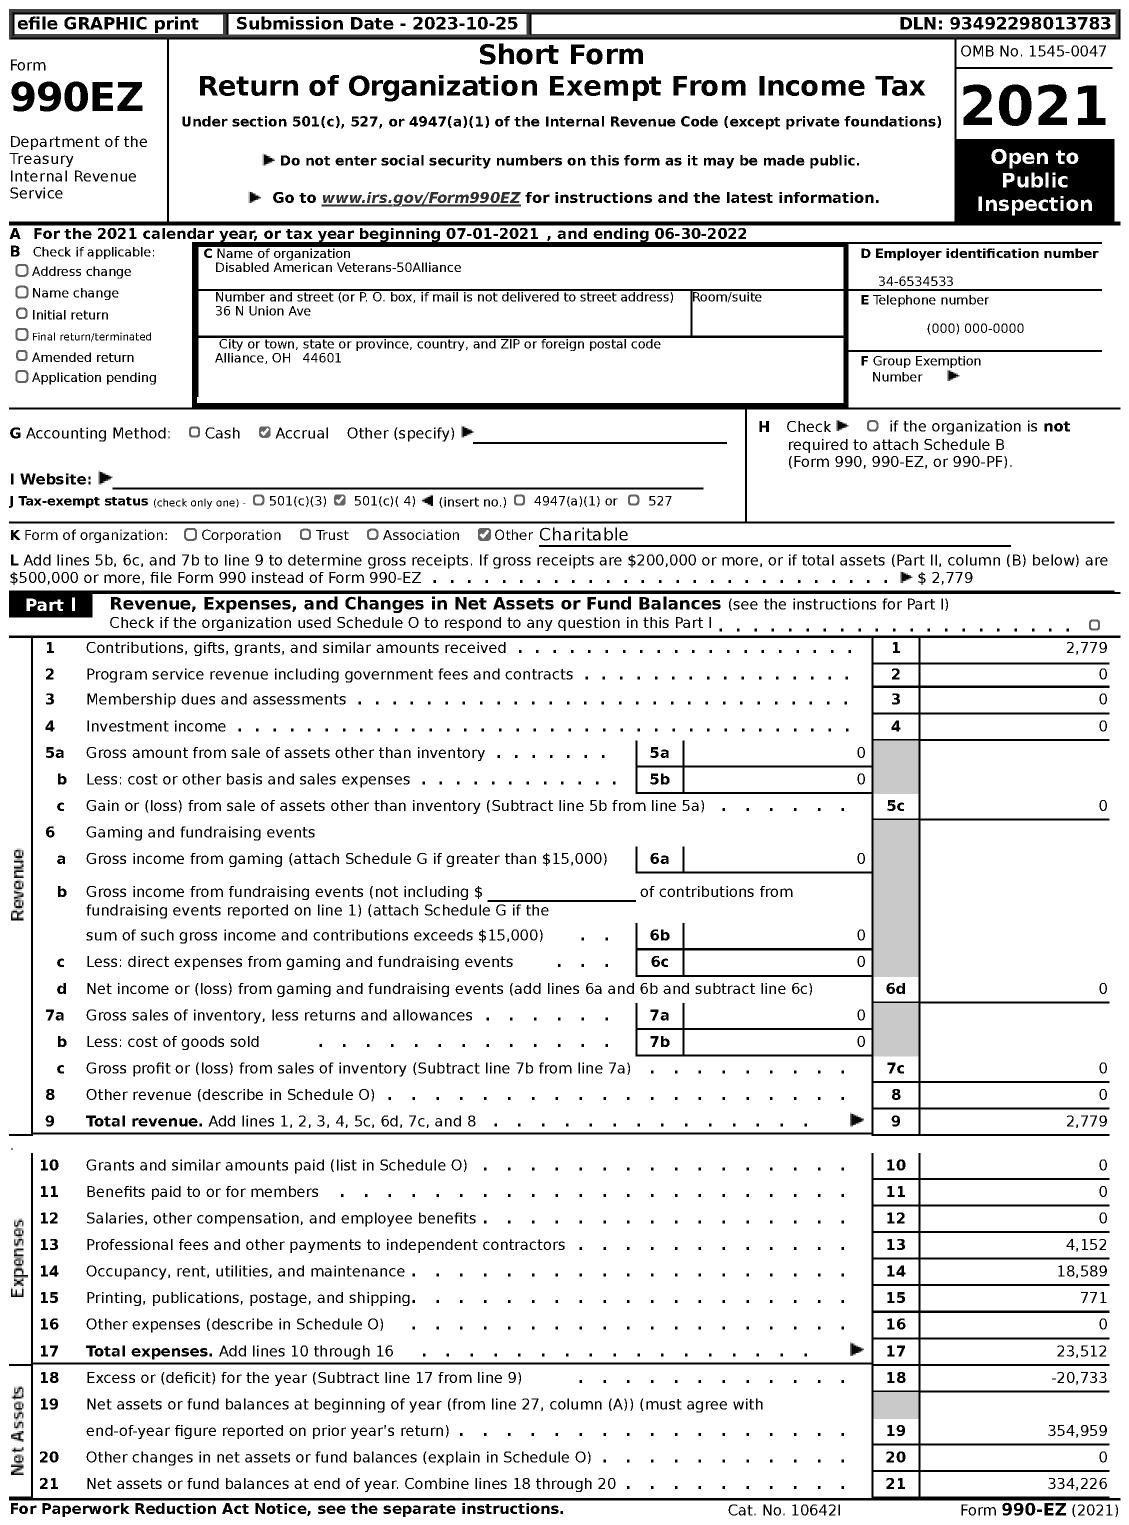 Image of first page of 2021 Form 990EZ for Disabled American Veterans - 50 Alliance